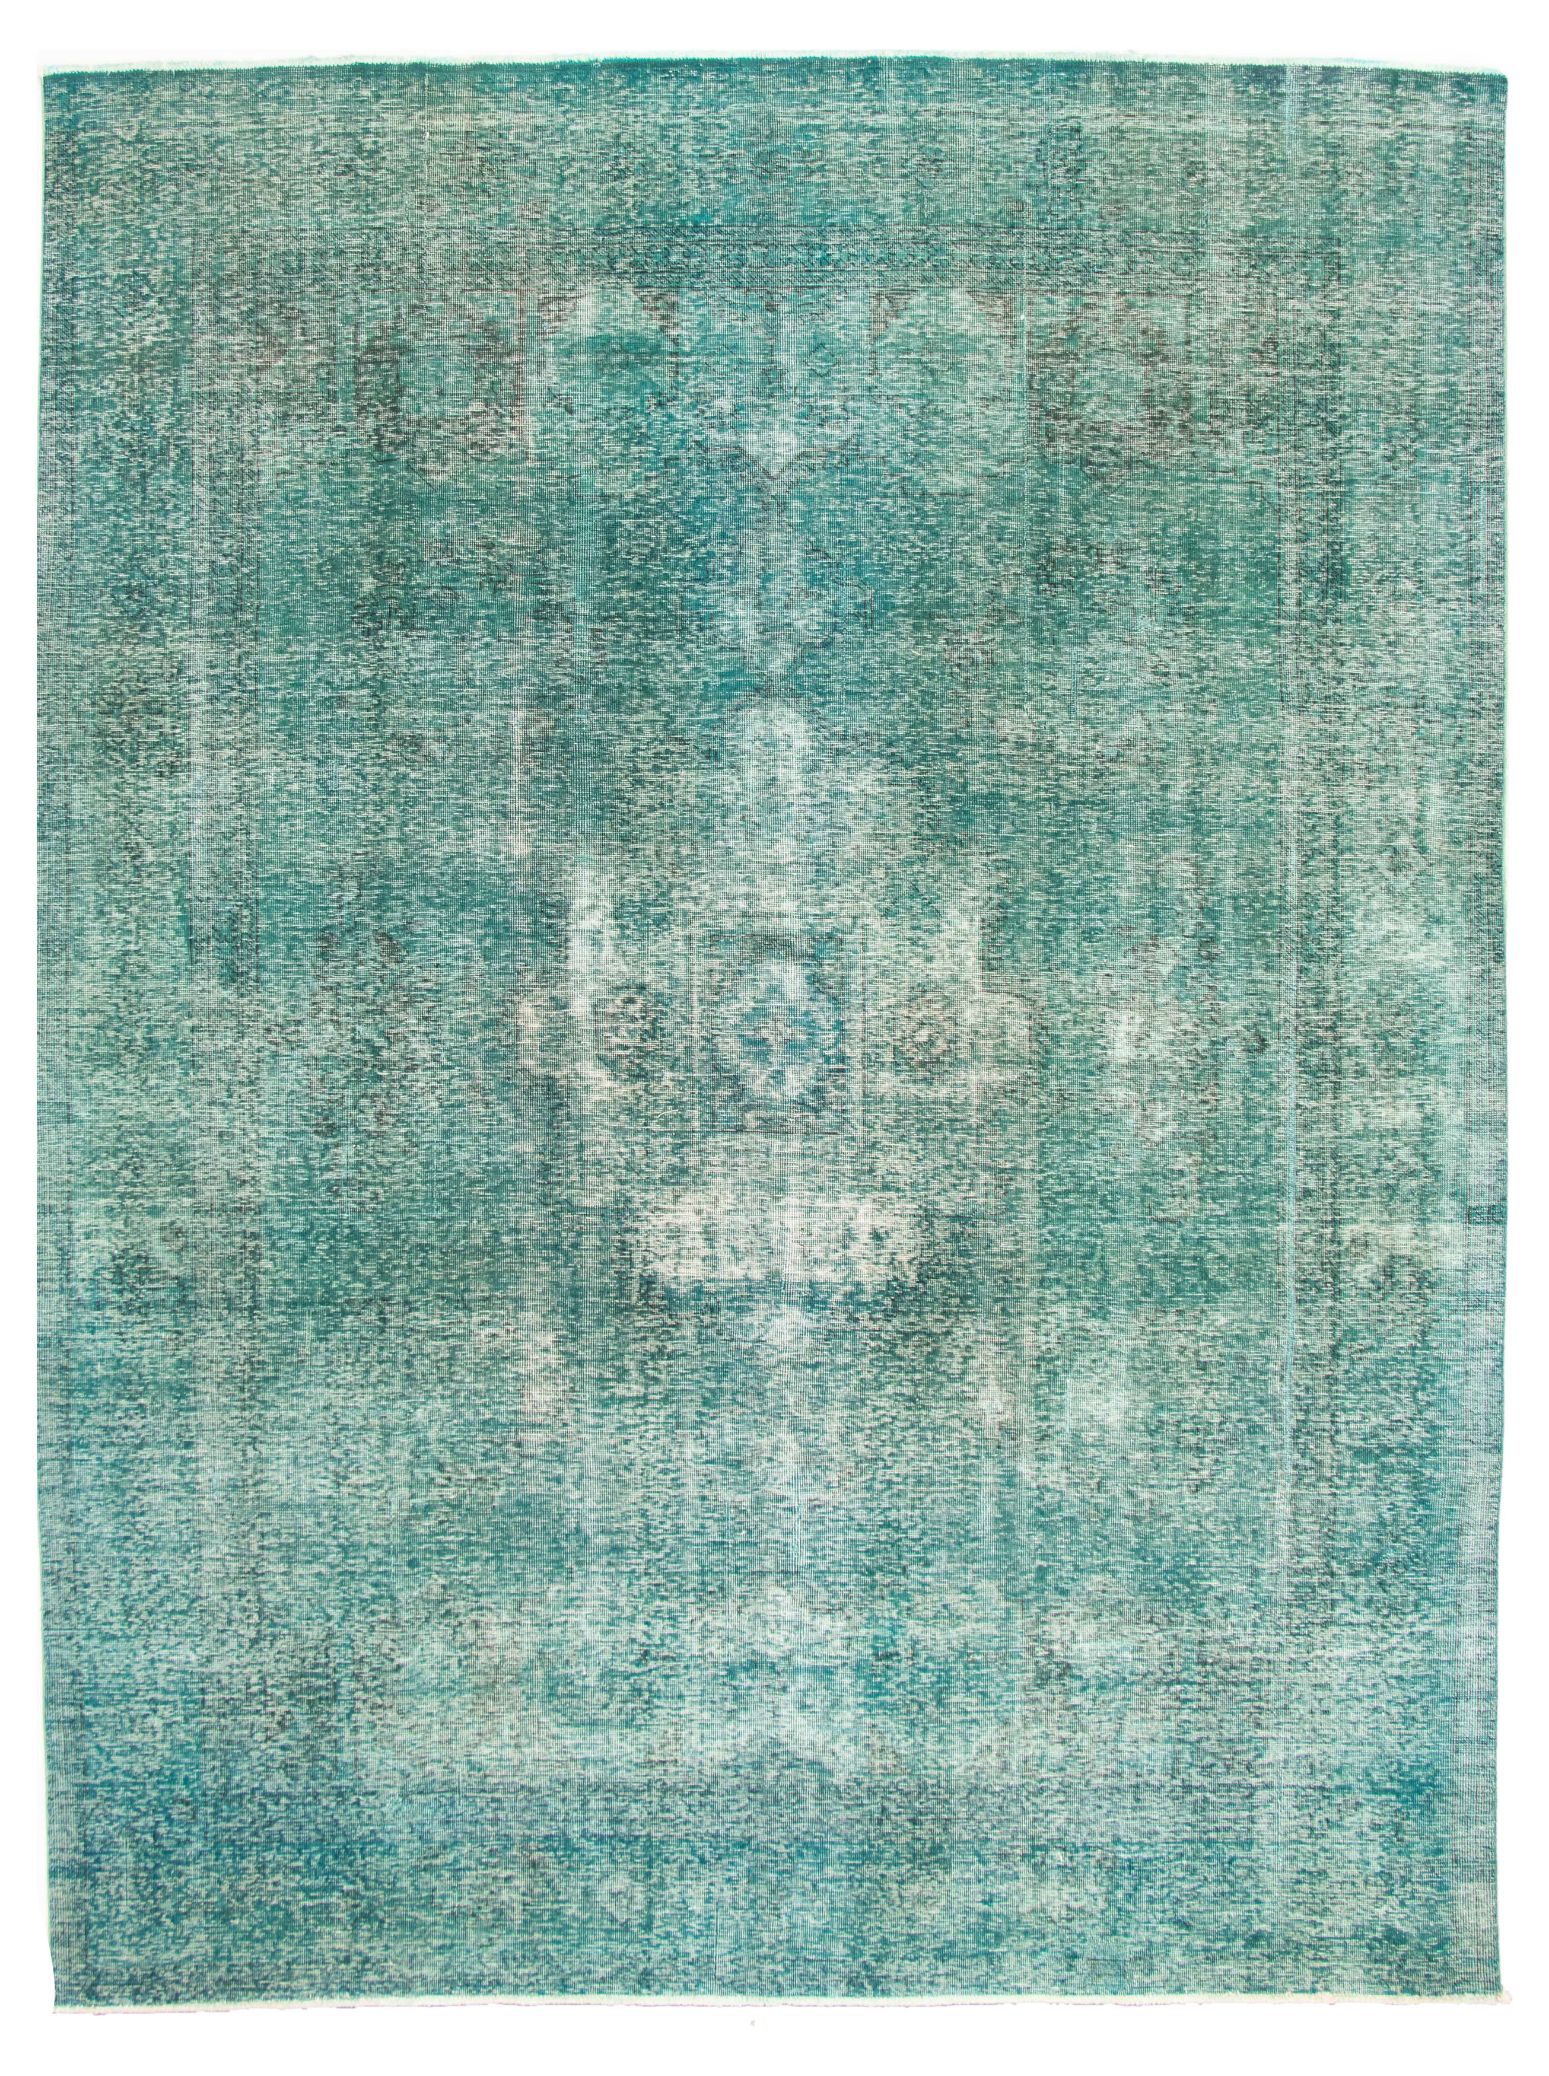 Hand-knotted Color Transition Teal Wool Rug 9'3" x 12'2"  Size: 9'3" x 12'2"  